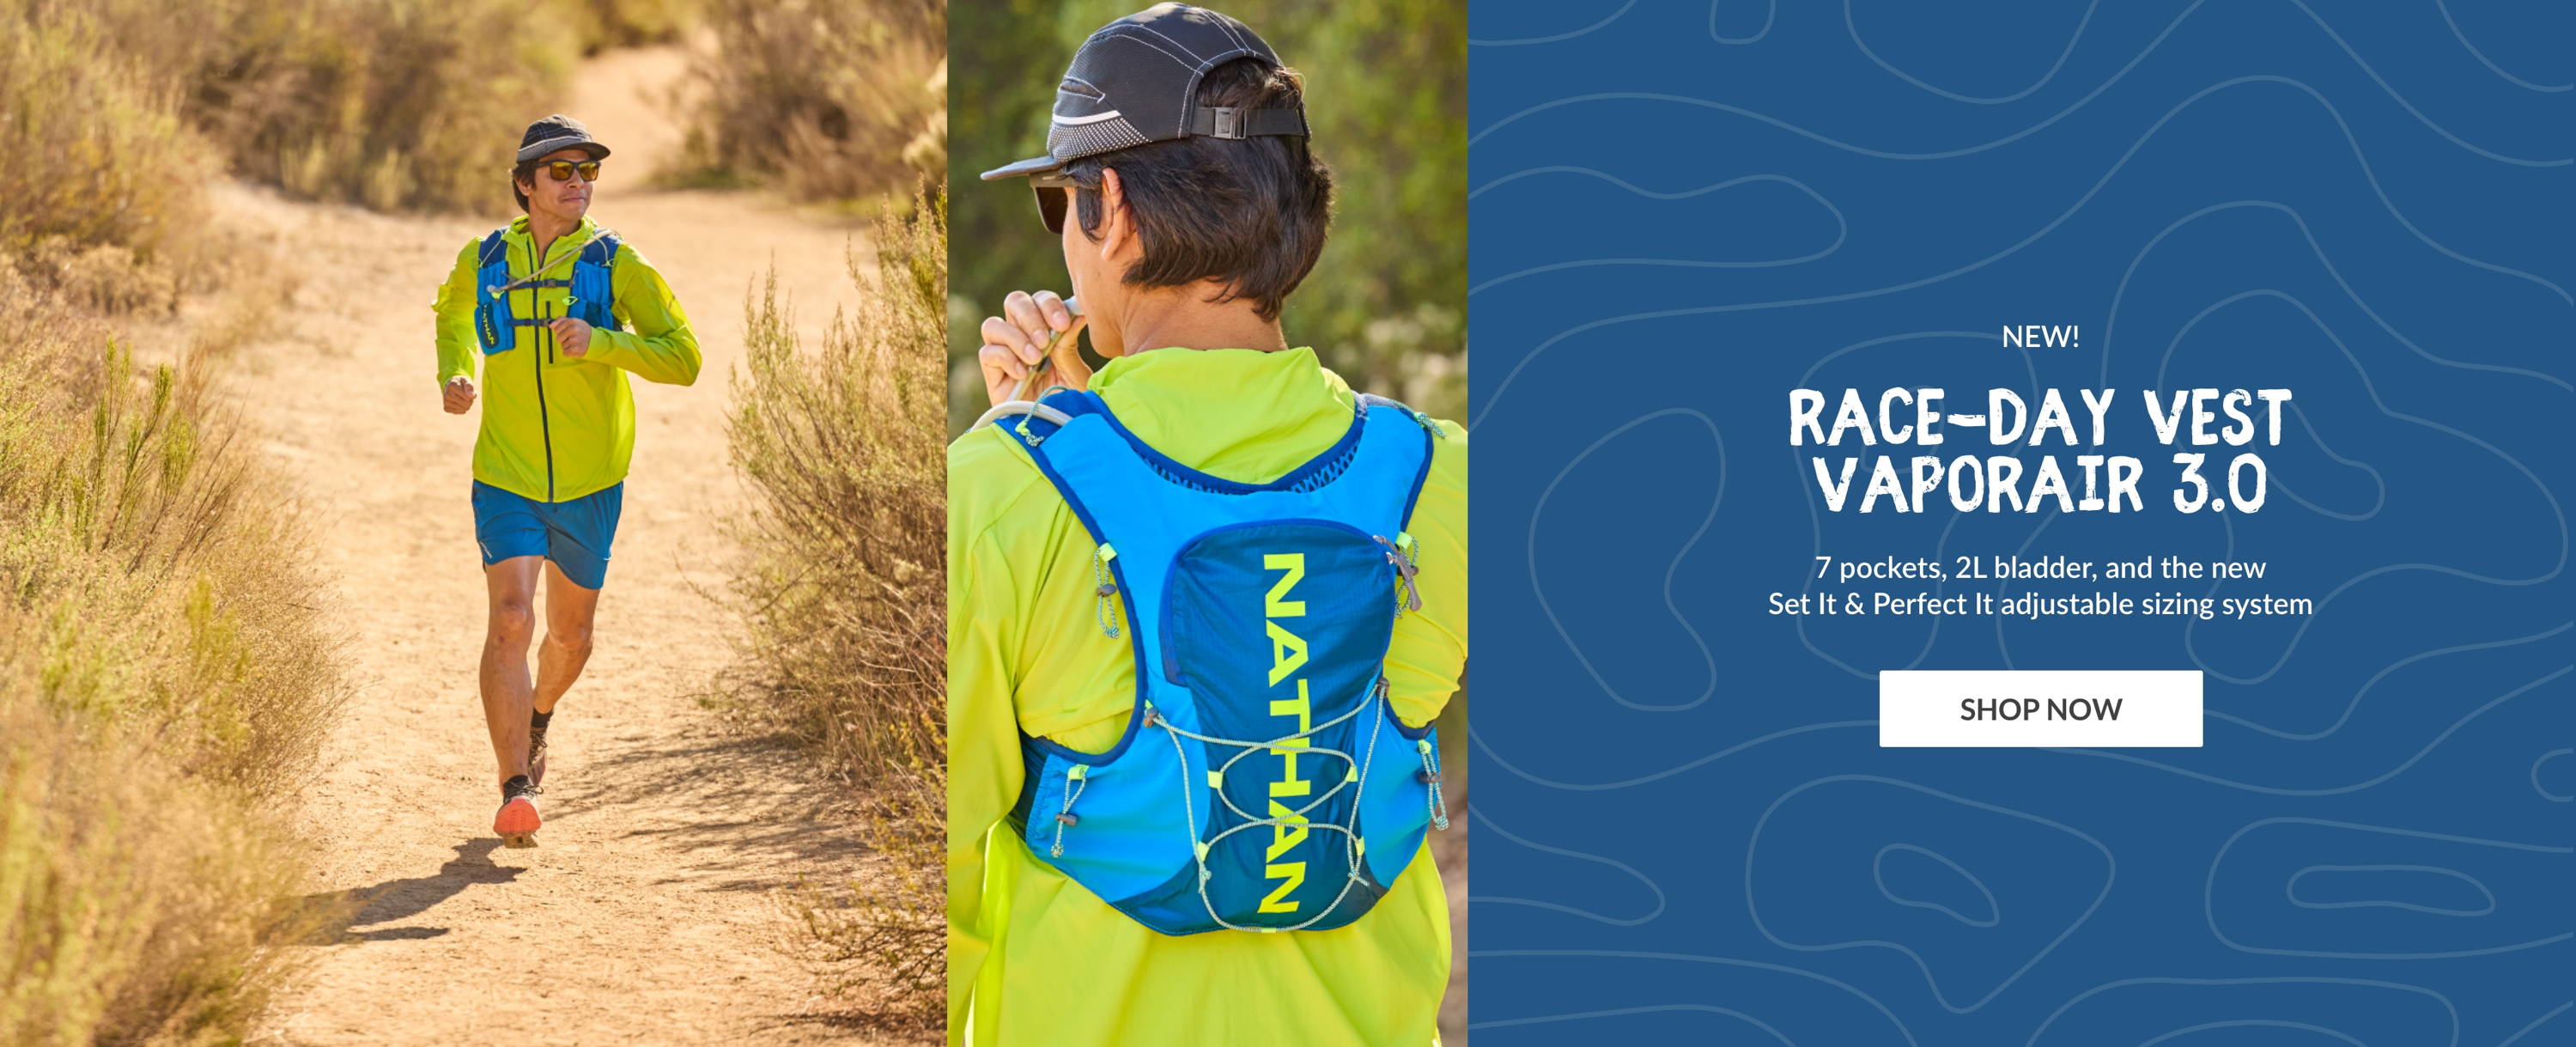 New! Race-Day Vest - VaporAir 3.0 - 7 pockets, 2L bladder, and new Set It & Perfect It Adjustable sizing system